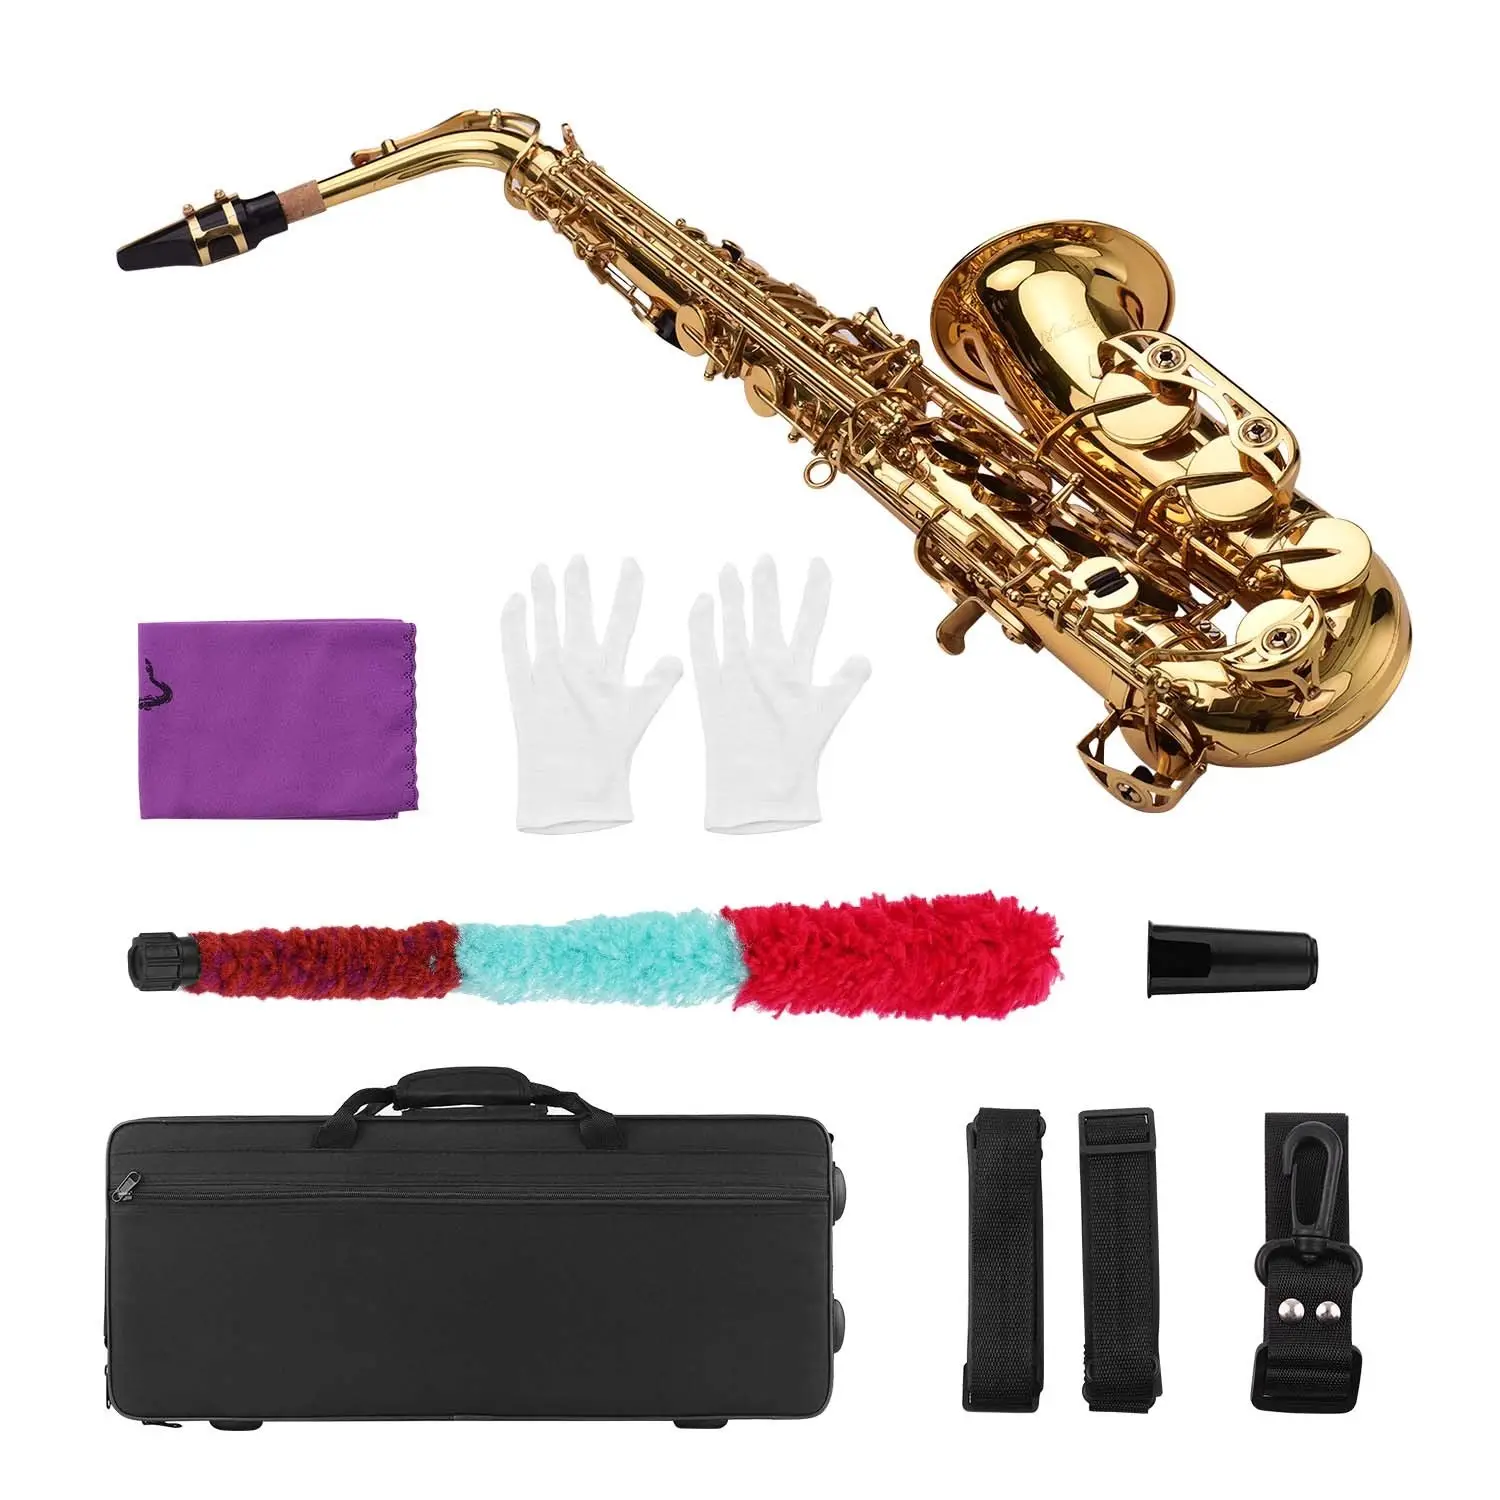 Muslady Golden Eb Alto Saxophone Sax Brass Body White Shell Keys Woodwind Instrument with Carry Case Gloves Cleaning Cloth Brush